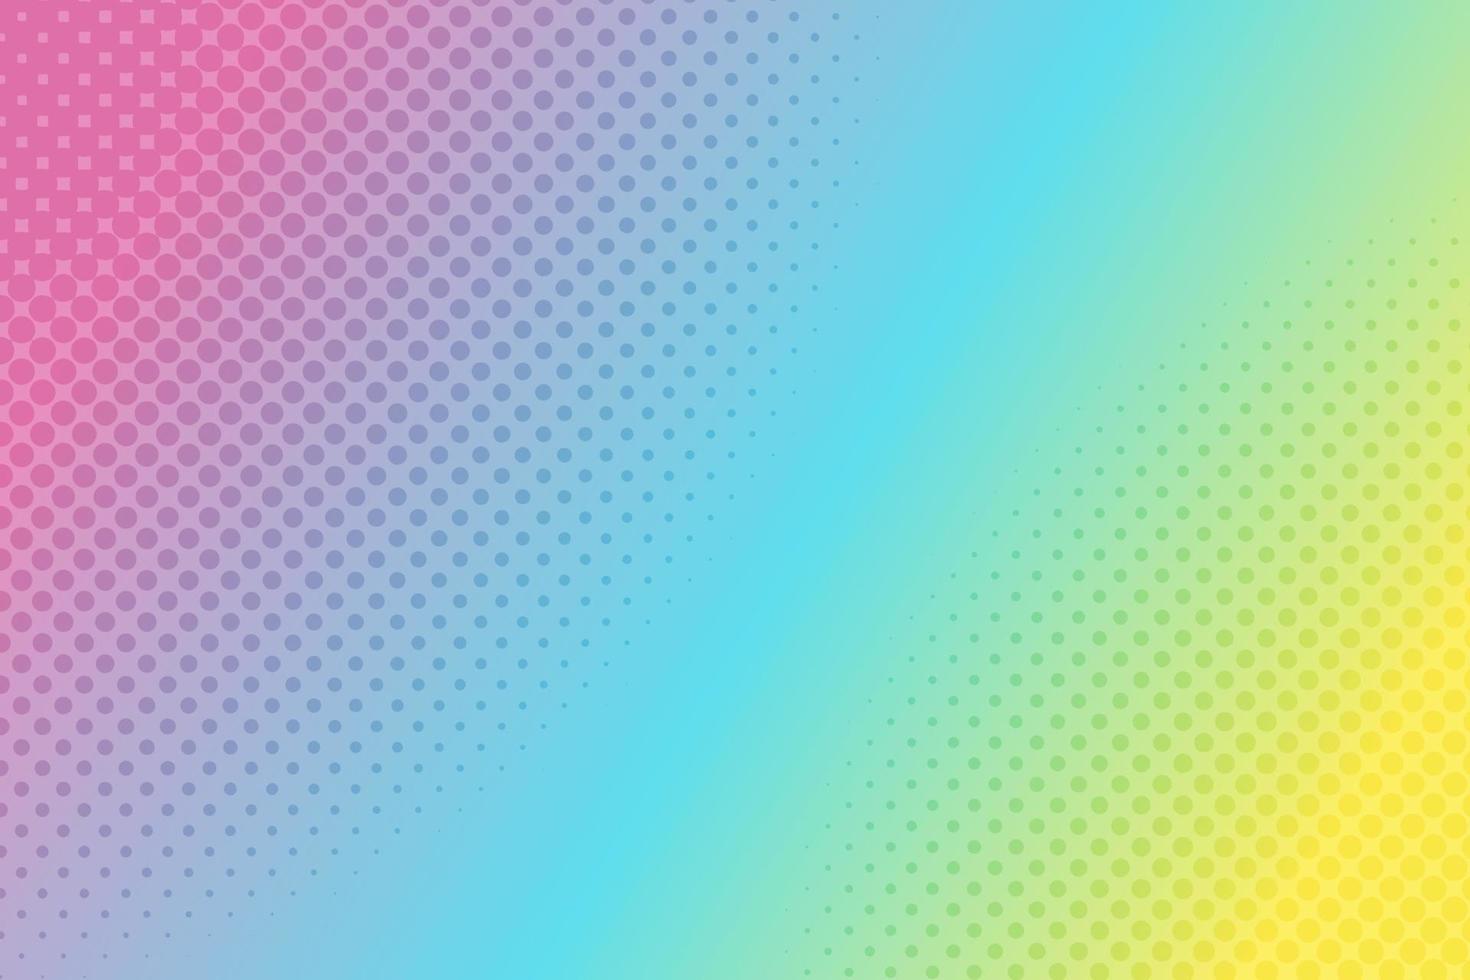 Rainbow pop art background with halftone dots in retro comic style. Vector illustration.